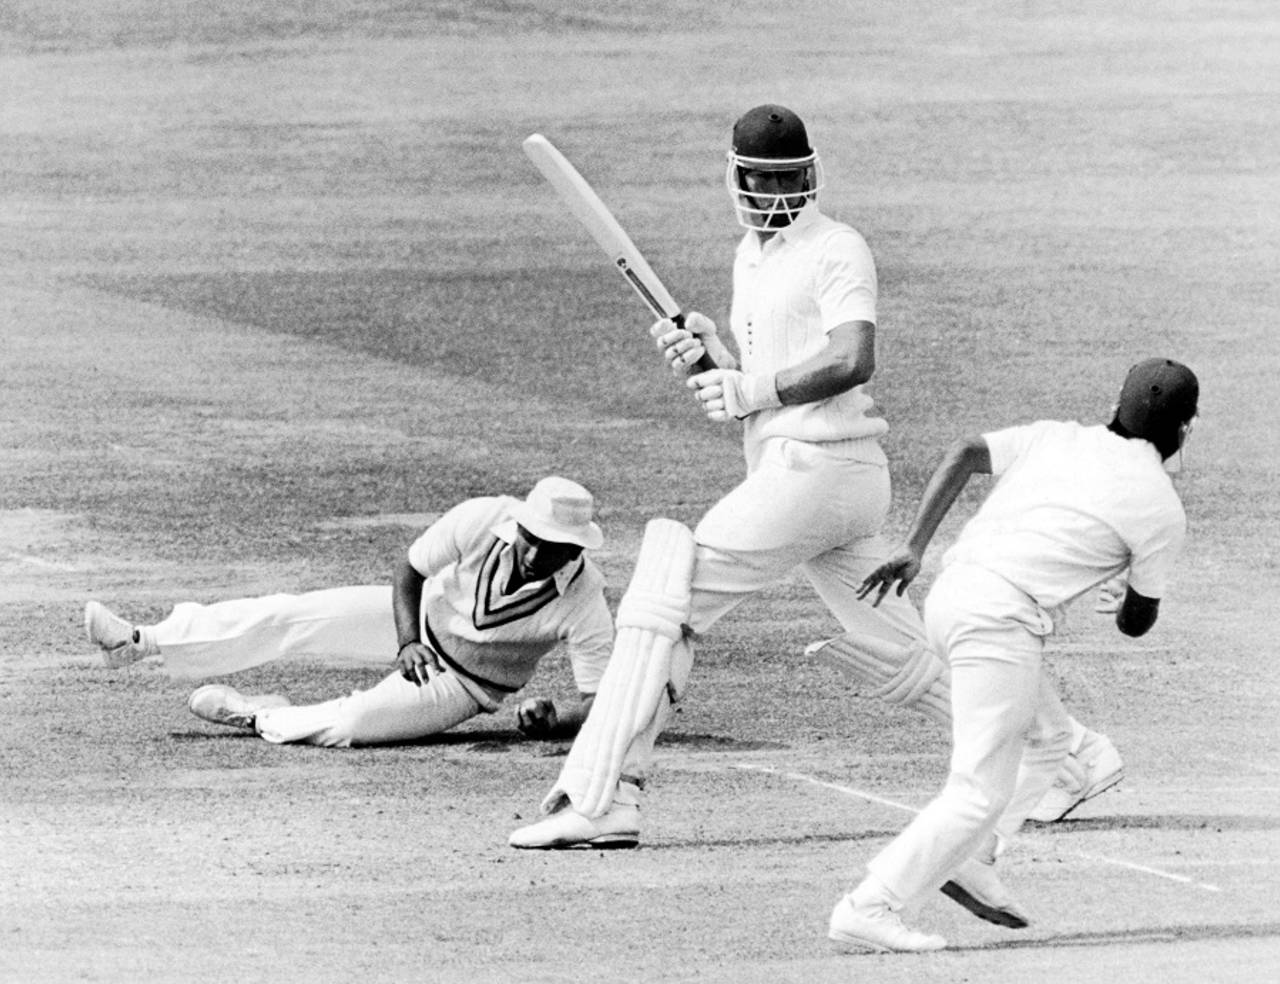 India's Sunil Gavaskar takes a smart catch at silly mid-off to dismiss England debutant Derek Pringle for 7, England v India, 1st Test, Lord's, June 11, 1982